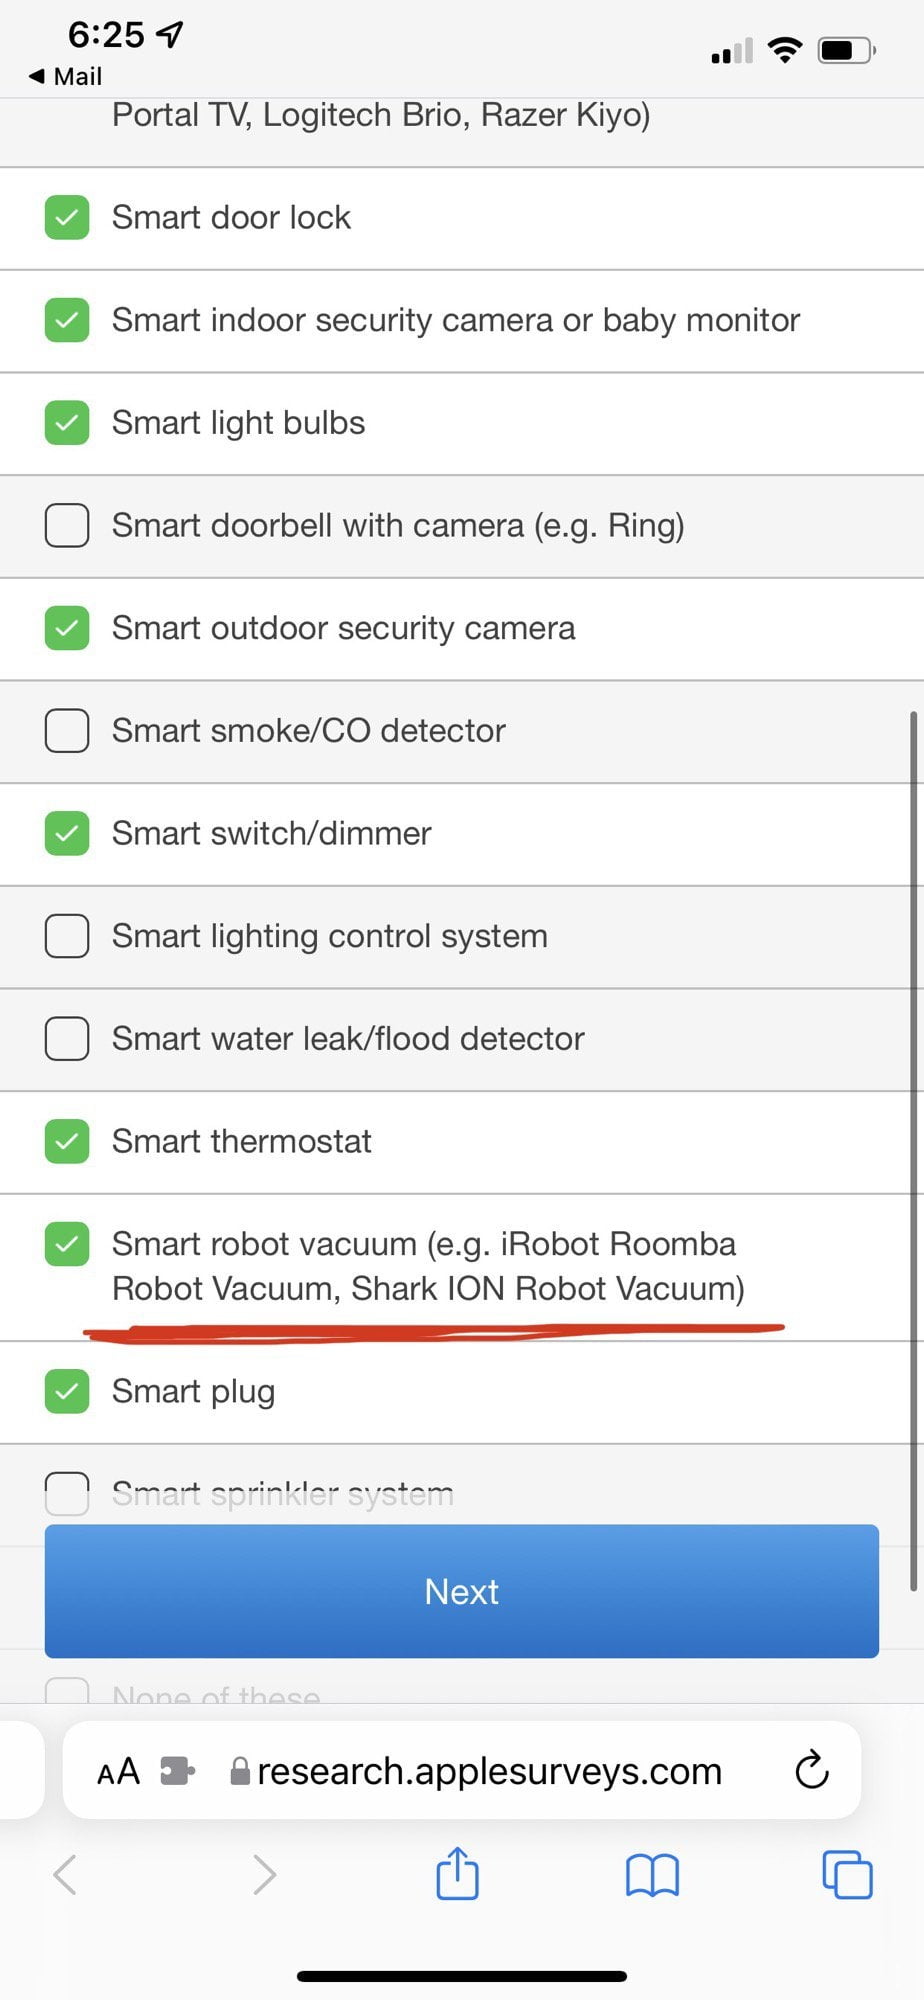 Apple Research asks about robot vacuum cleaners in the Smart